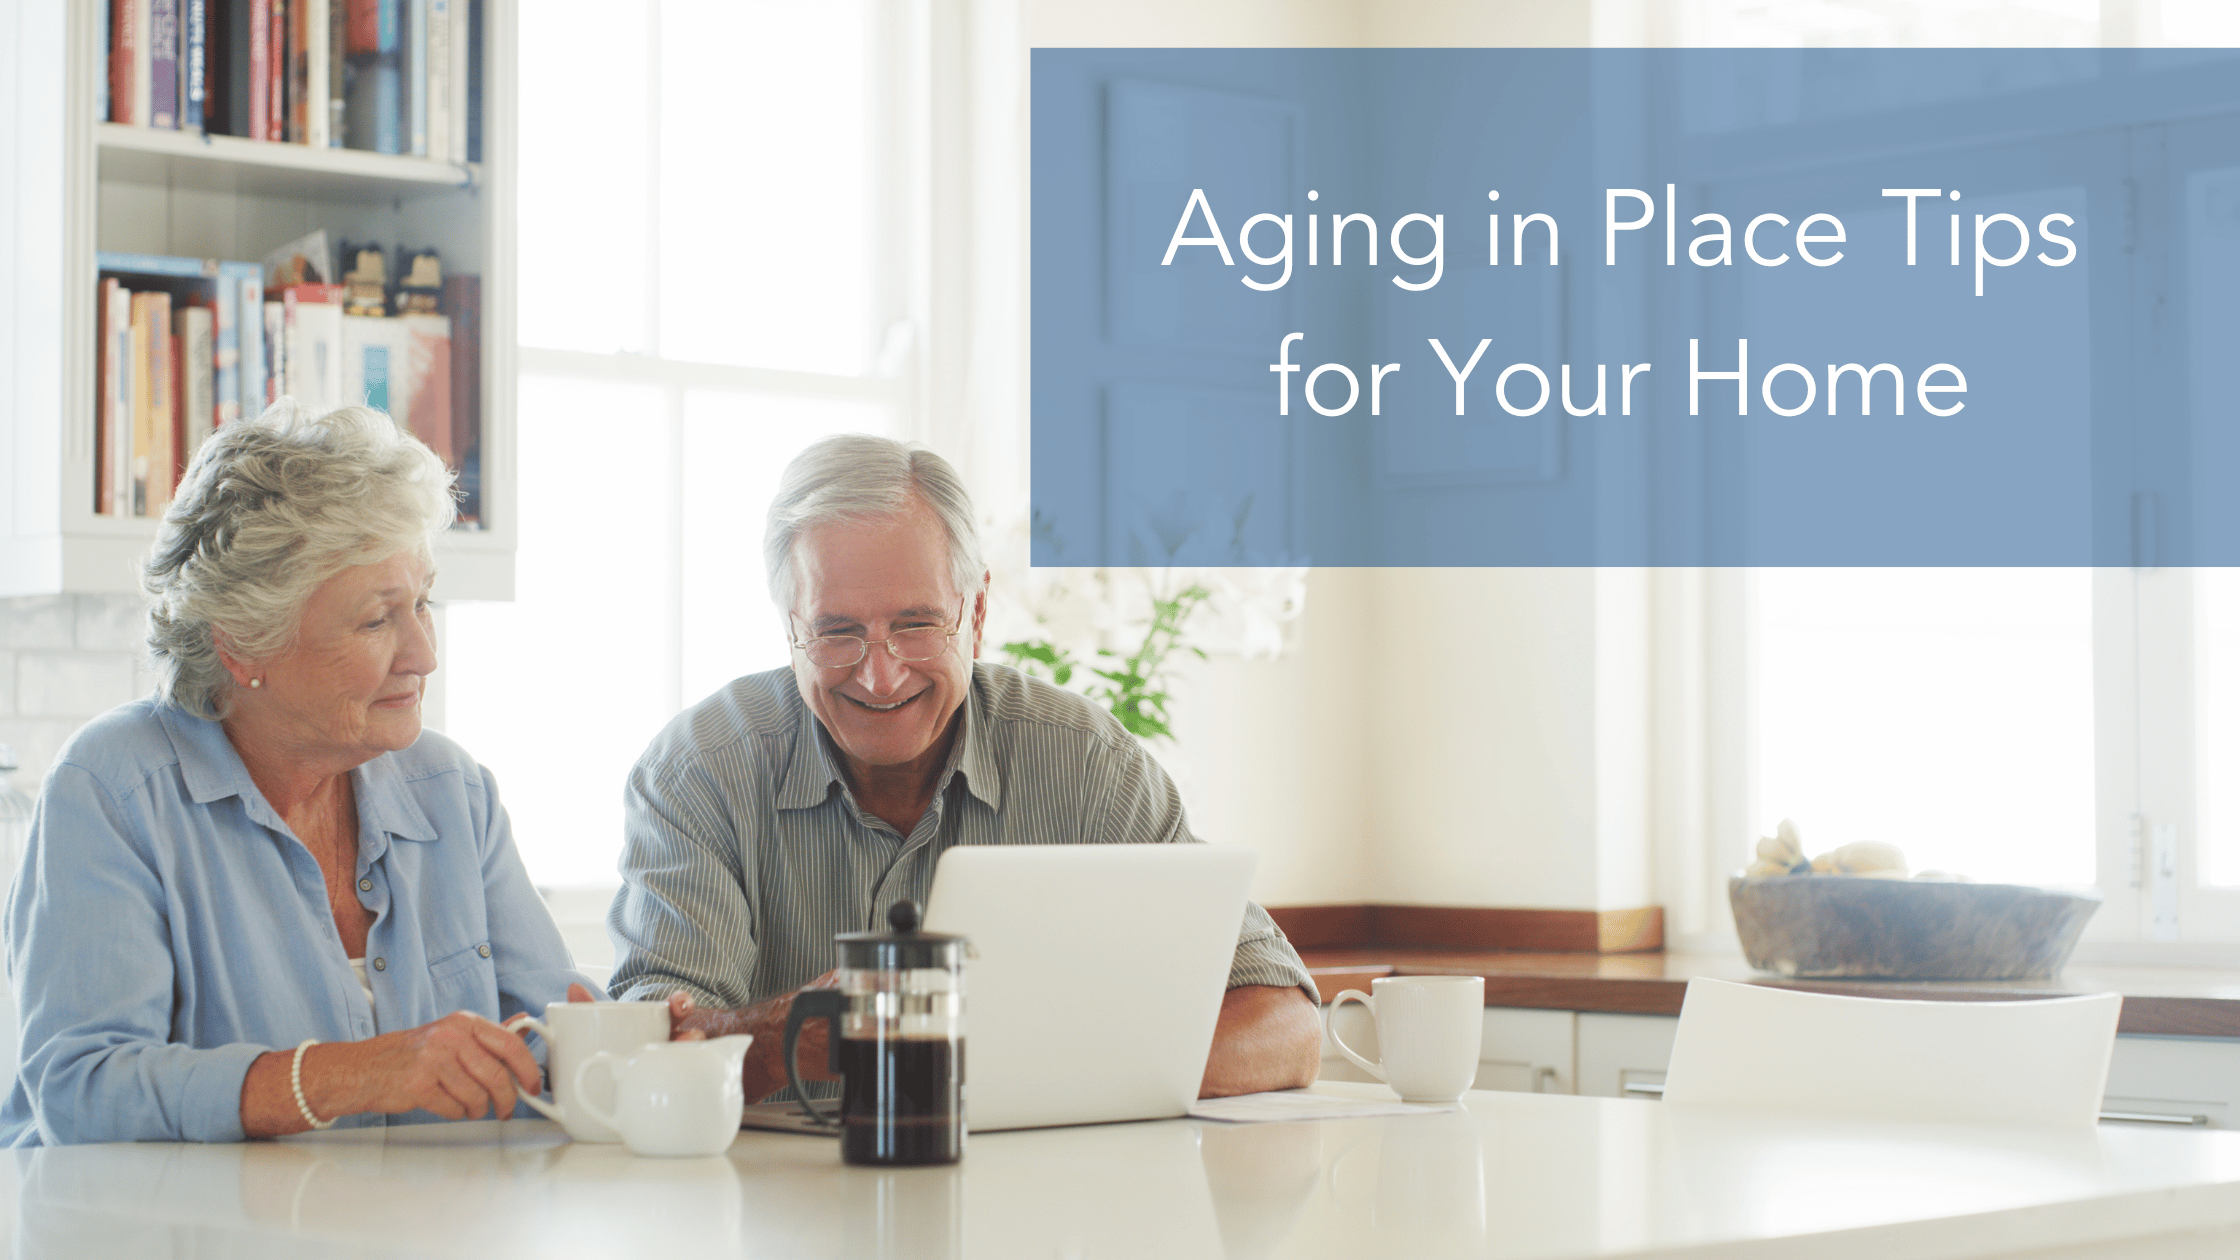 https://handymanconnection.com/wp-content/uploads/2022/11/Aging-in-Place-Tips-for-Your-Home.png